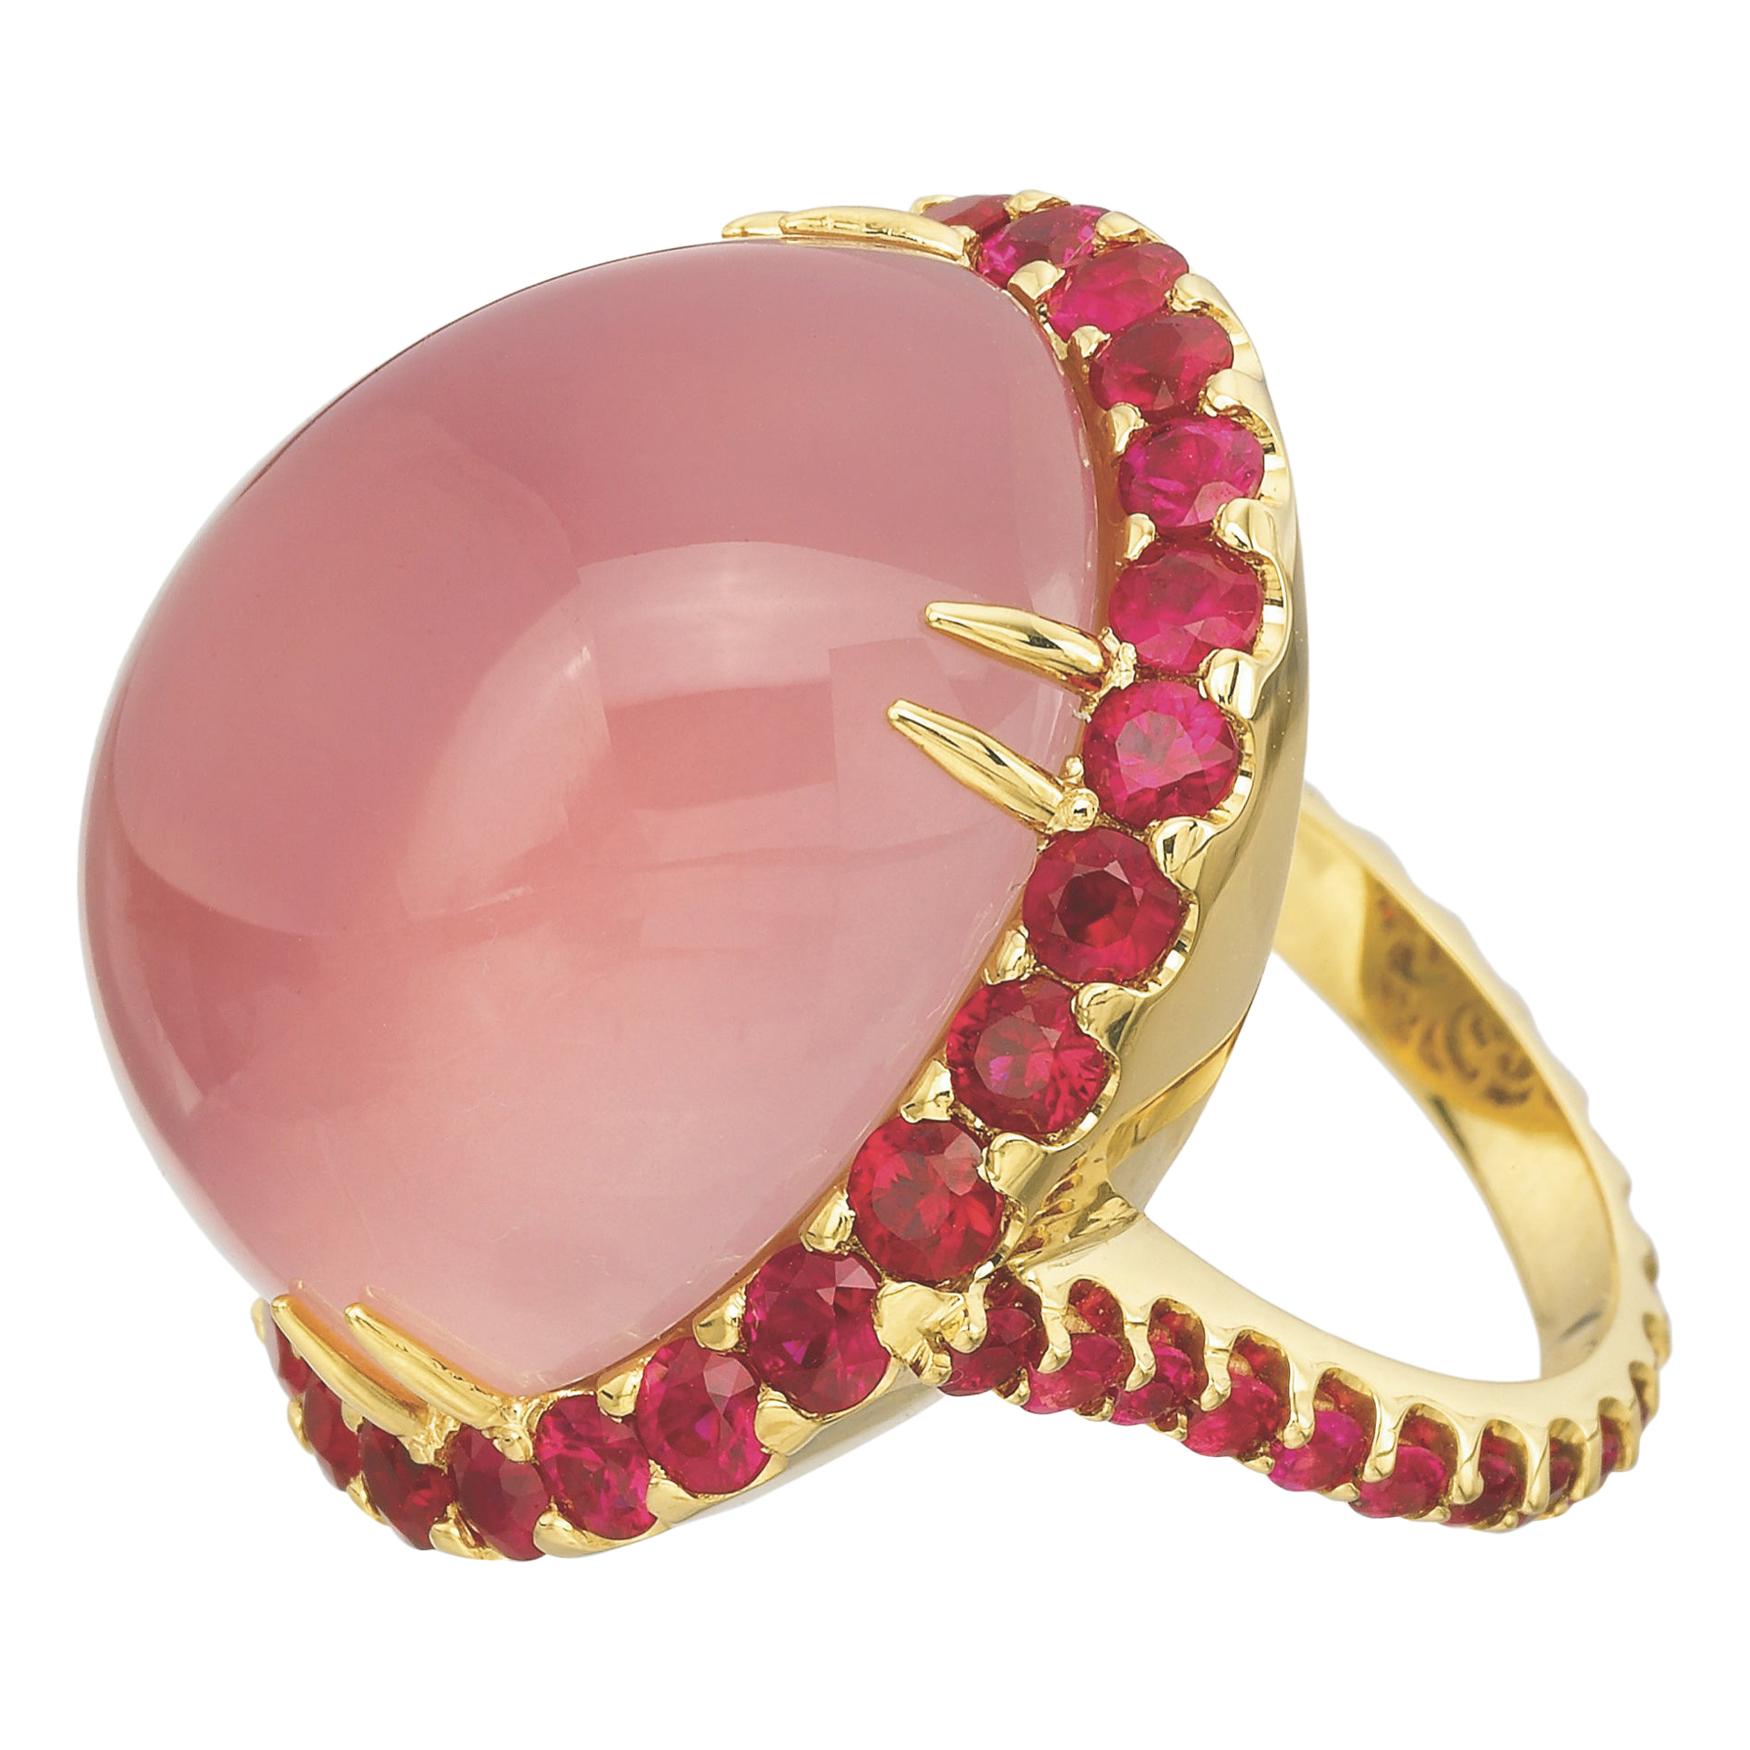 40.43 Carat Rose Quartz Oval Cabochon and Ruby Cocktail Ring